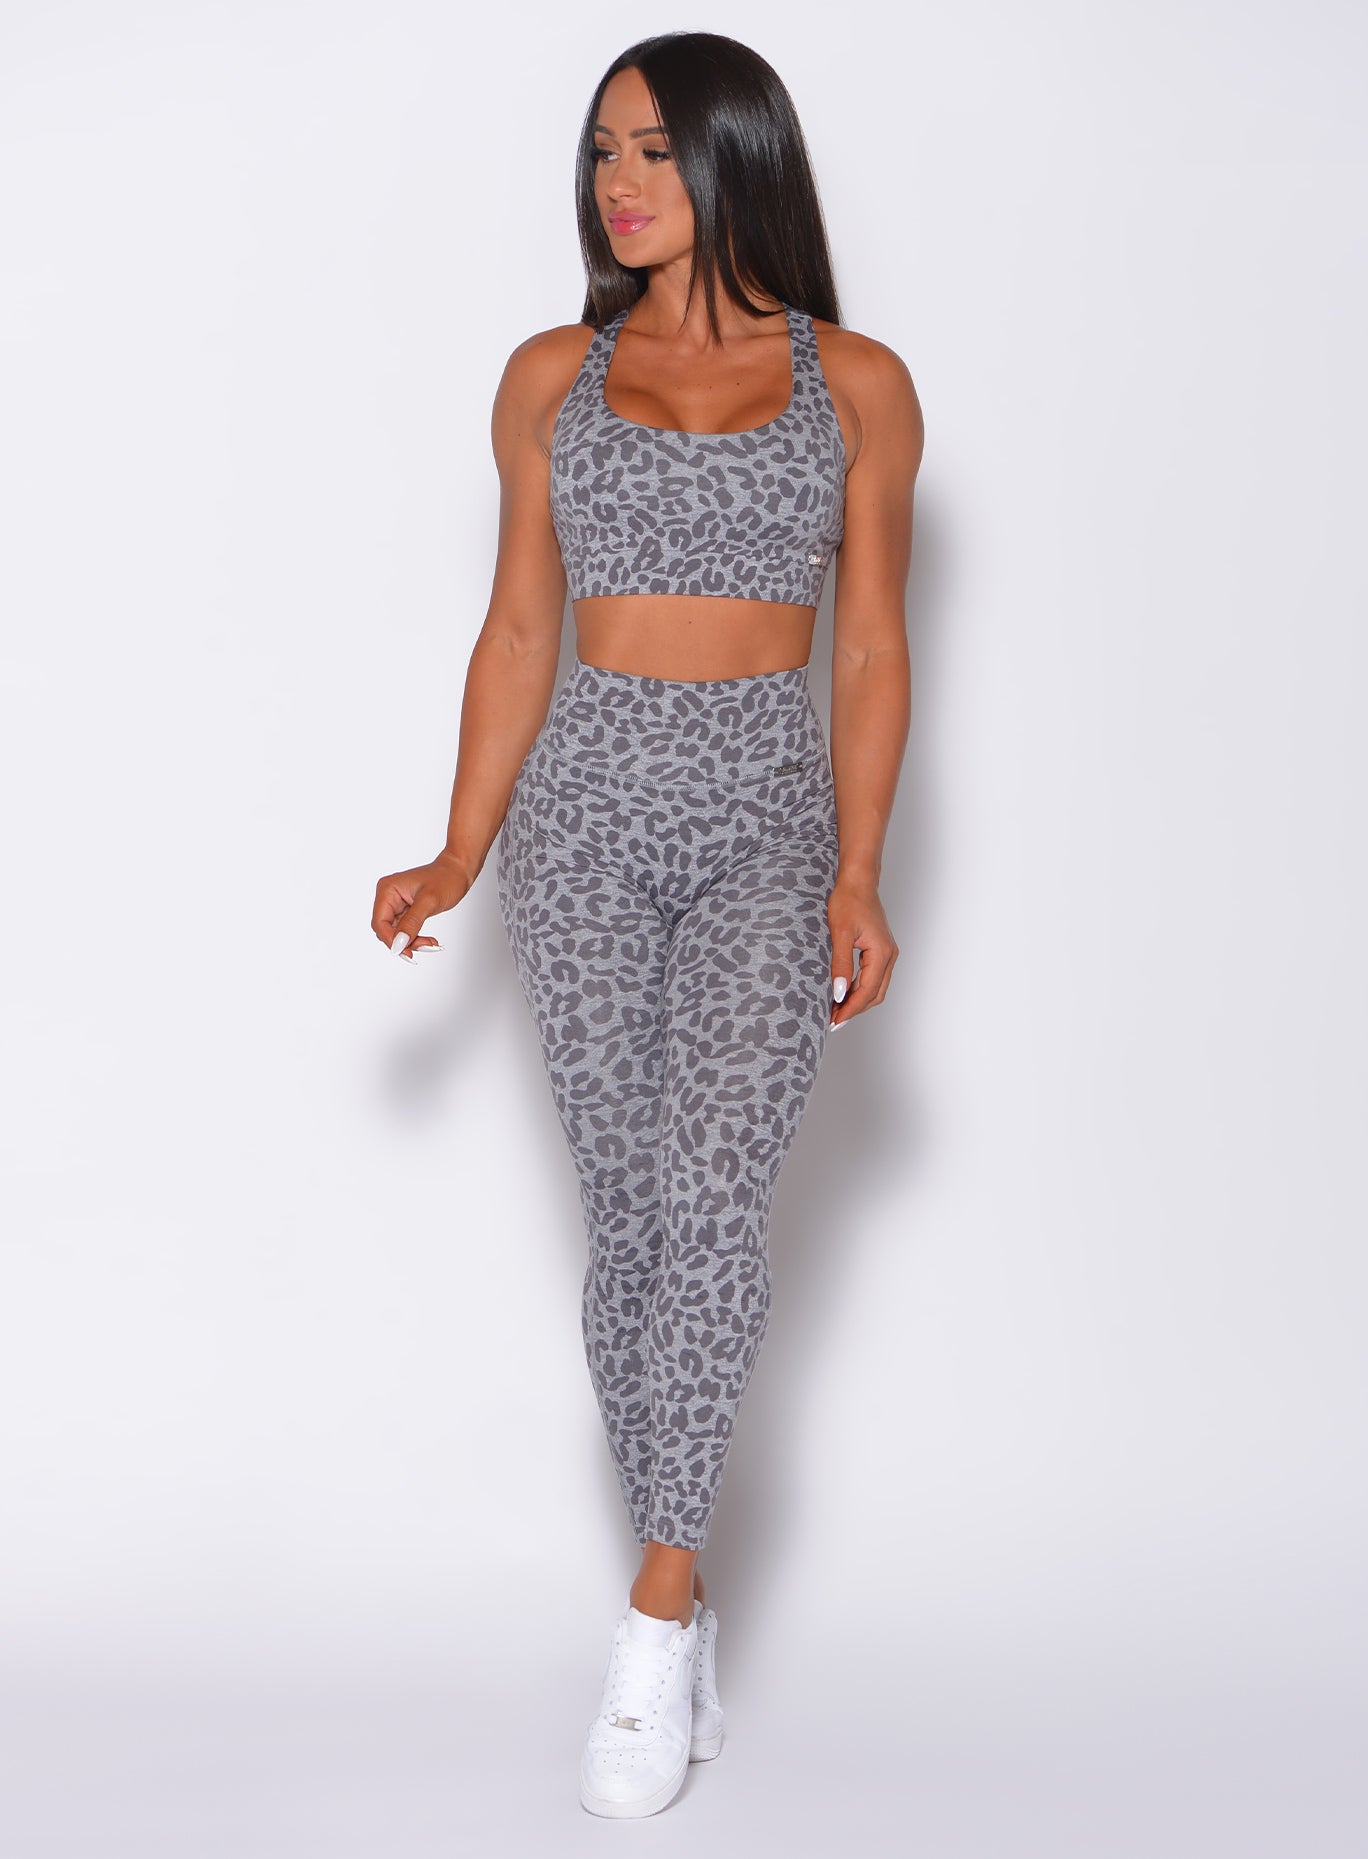 Front profile view of a model facing to her right wearing our fit cheetah leggings in lightning gray color and a matching bra